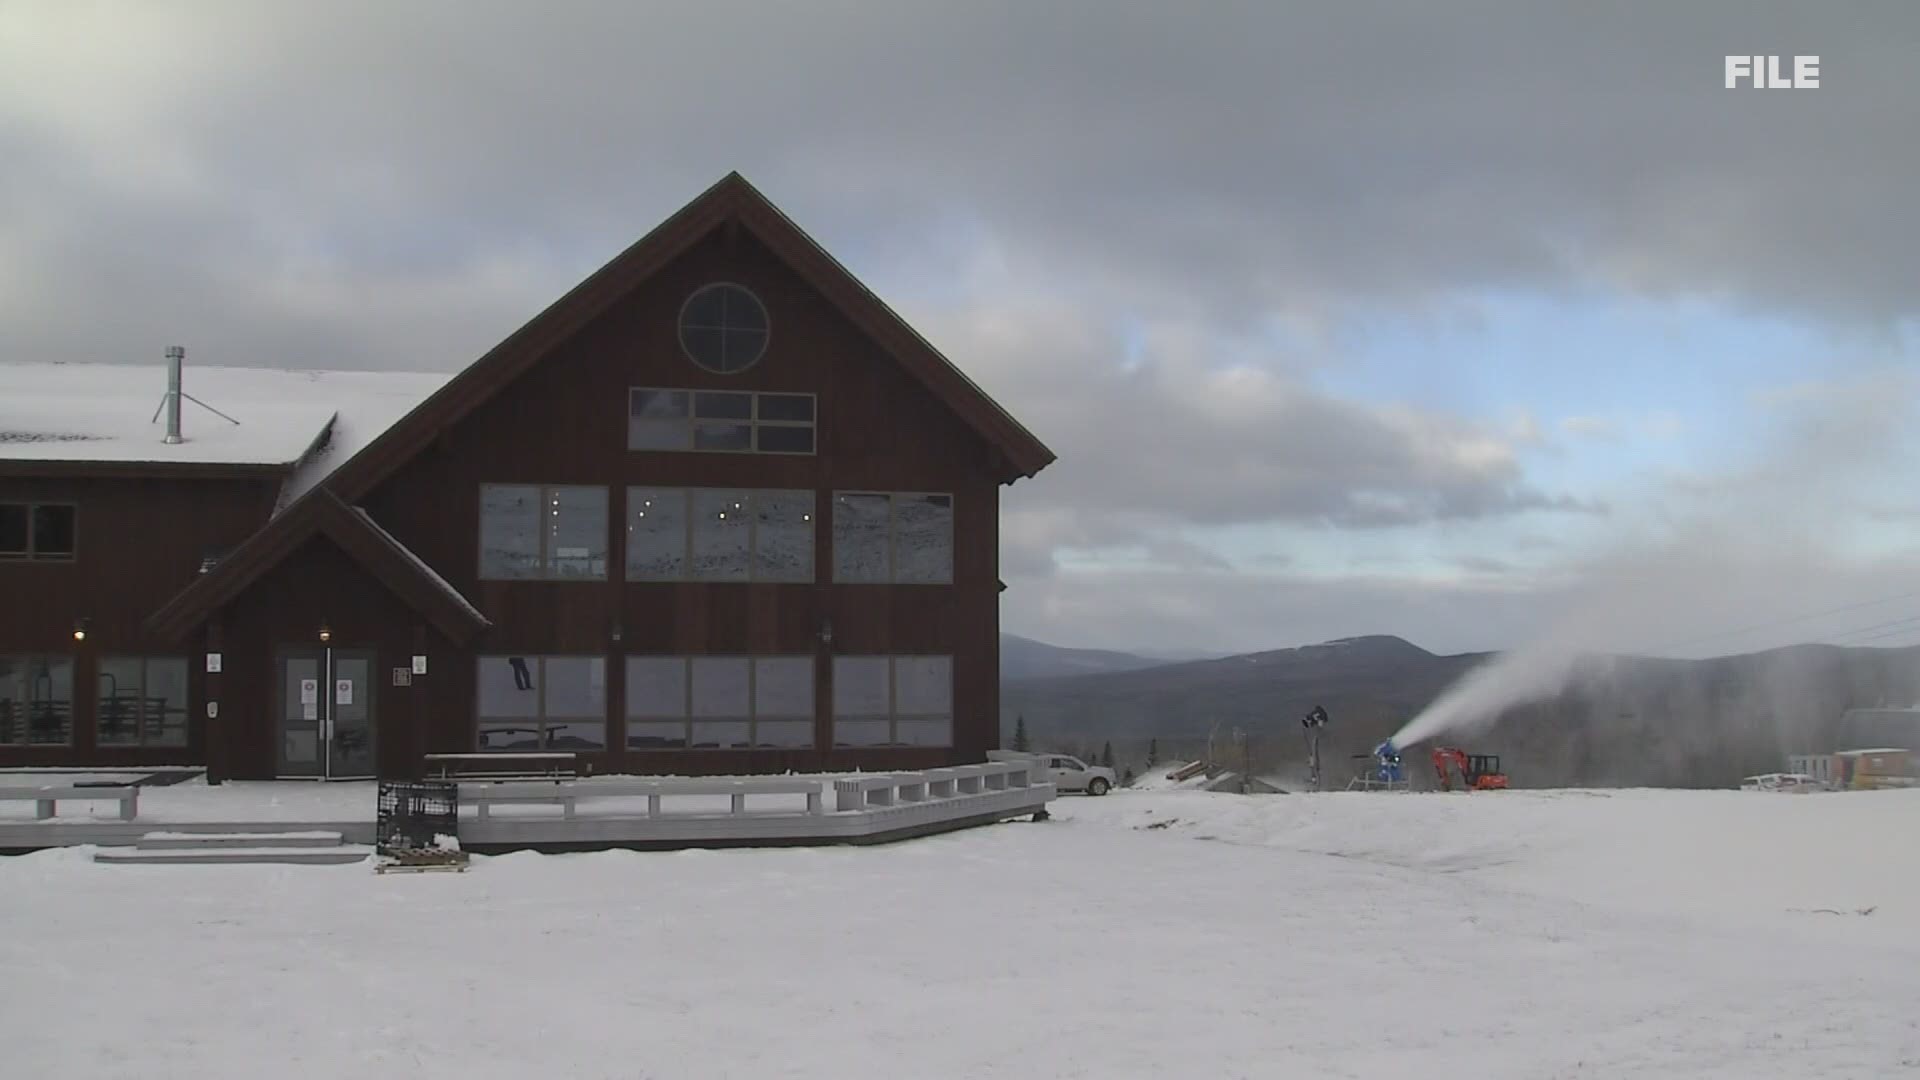 Officials at Saddleback say that it was a lot of work to get the mountain up and running again, but they are pleased with the positive response from locals.